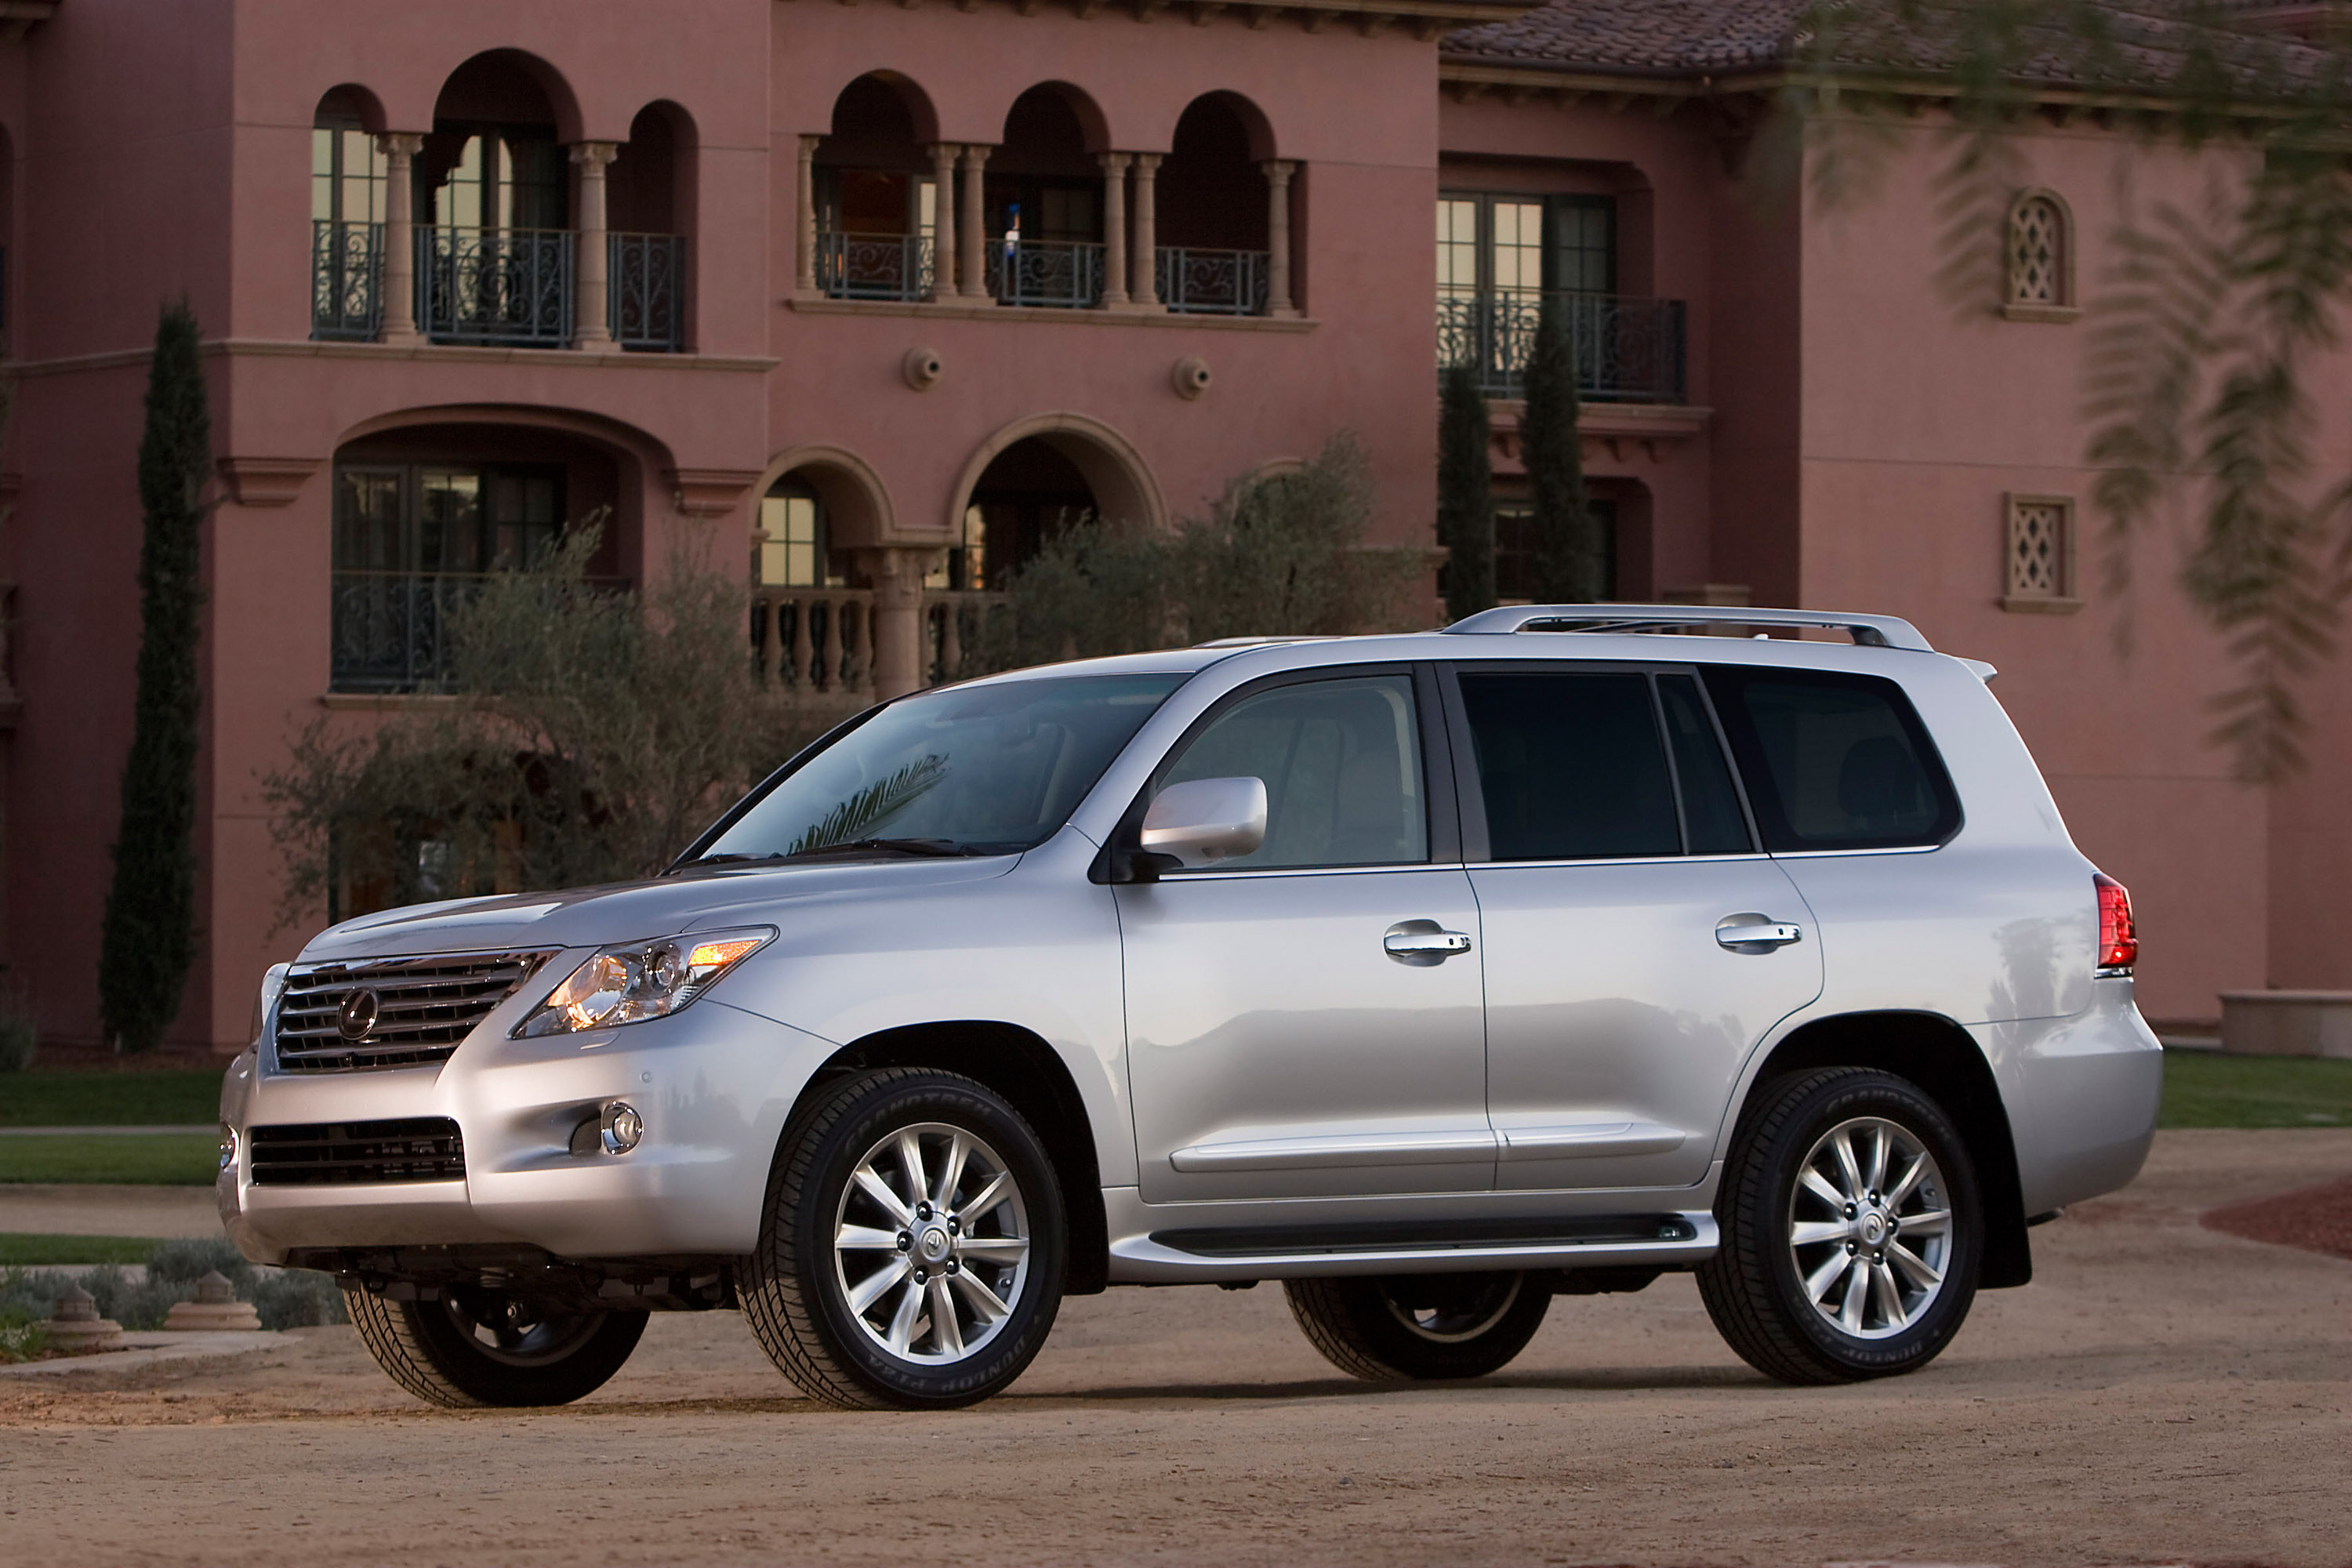 2010 Lexus LX 570 packs new features and vision